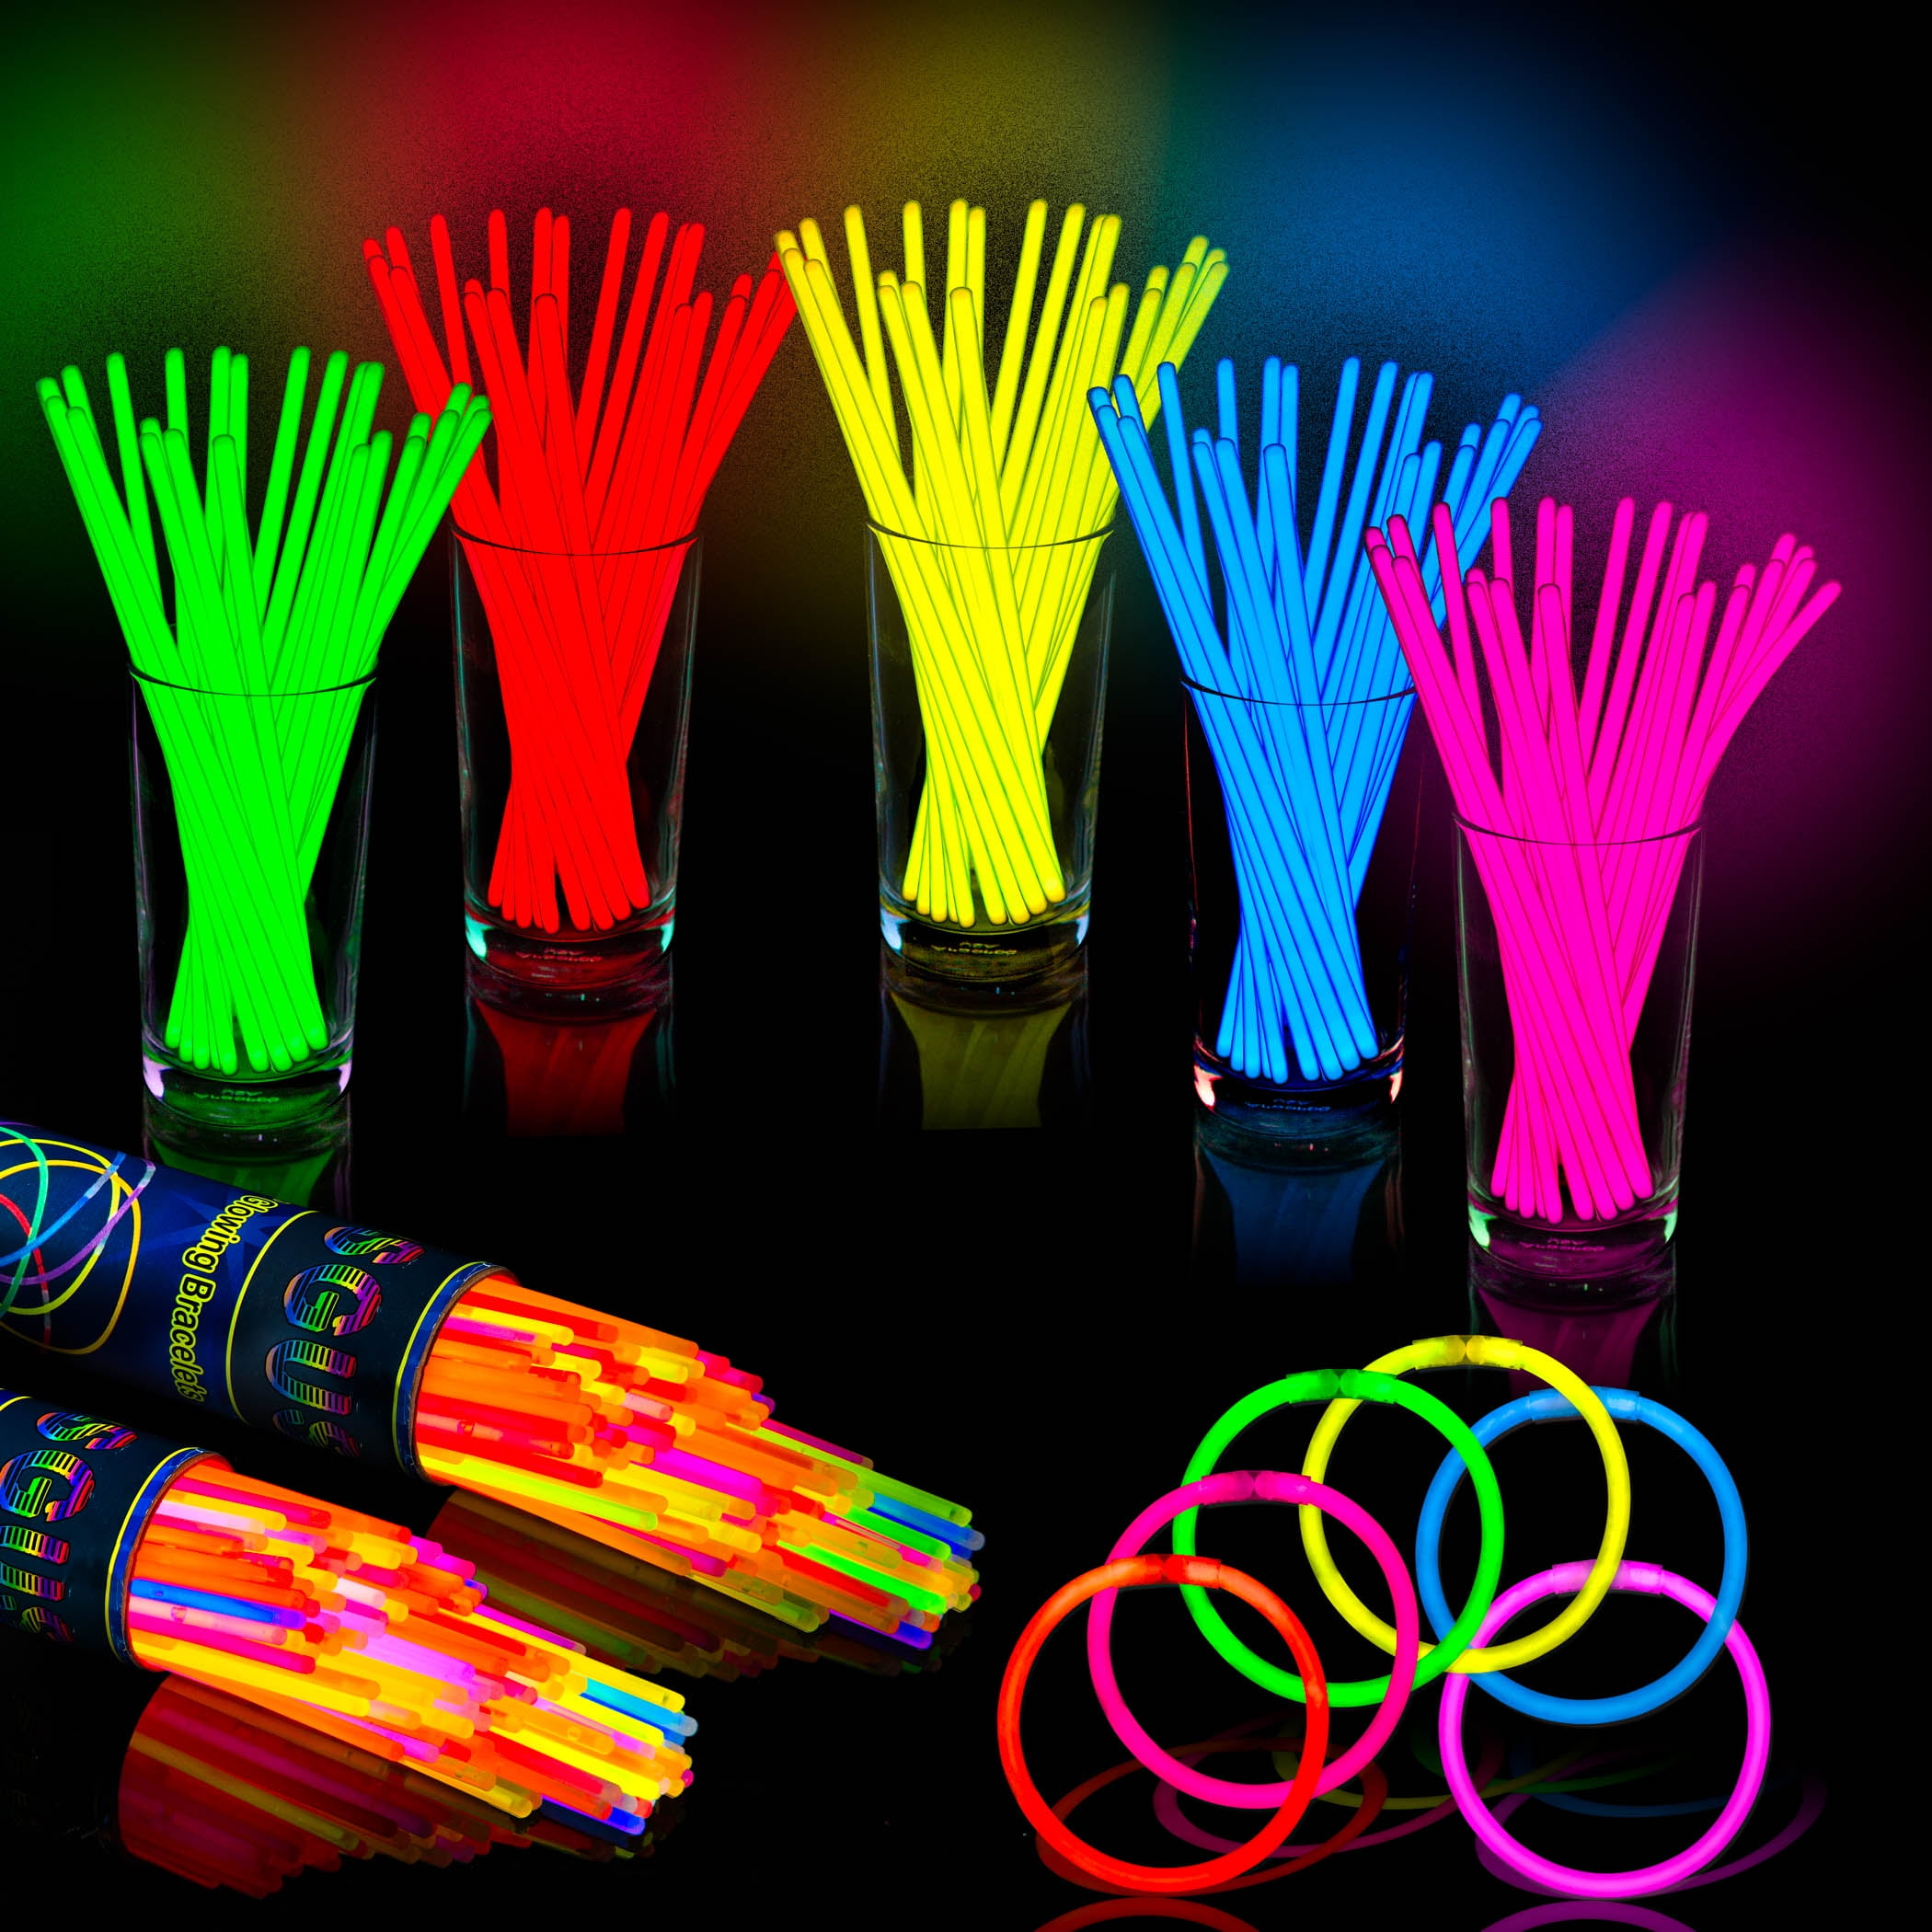  AMOR PRESENT Glow Sticks Party Supplies, 200PCS Glow in The  Dark Party Favors Bright Neon Light Sticks Glow Party Decorations 1.57 Inch  for Christmas, Easter, Football, Halloween Party Supplies : Toys